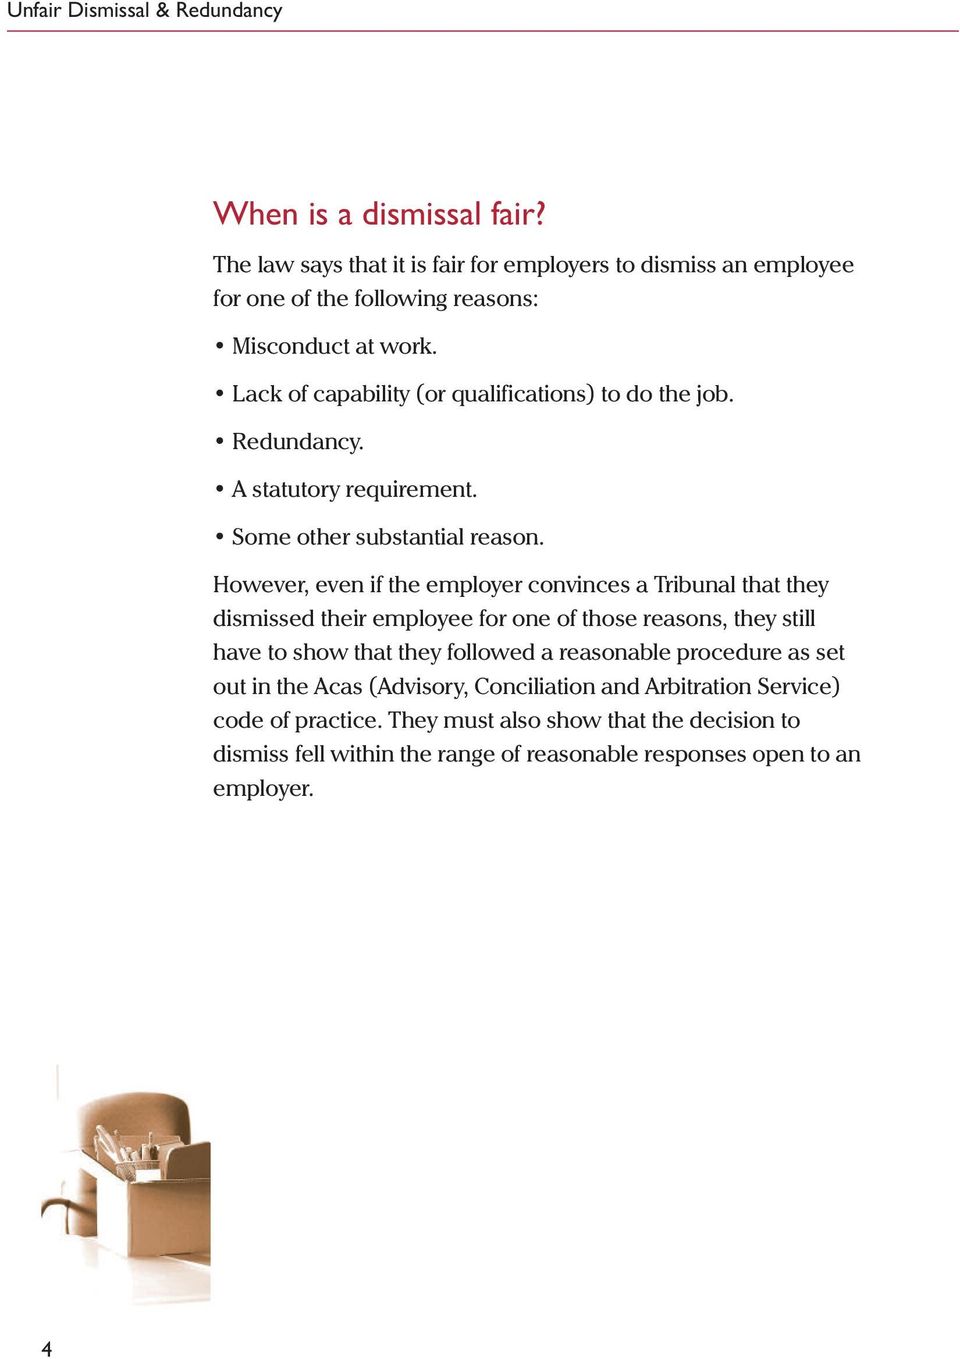 However, even if the employer convinces a Tribunal that they dismissed their employee for one of those reasons, they still have to show that they followed a